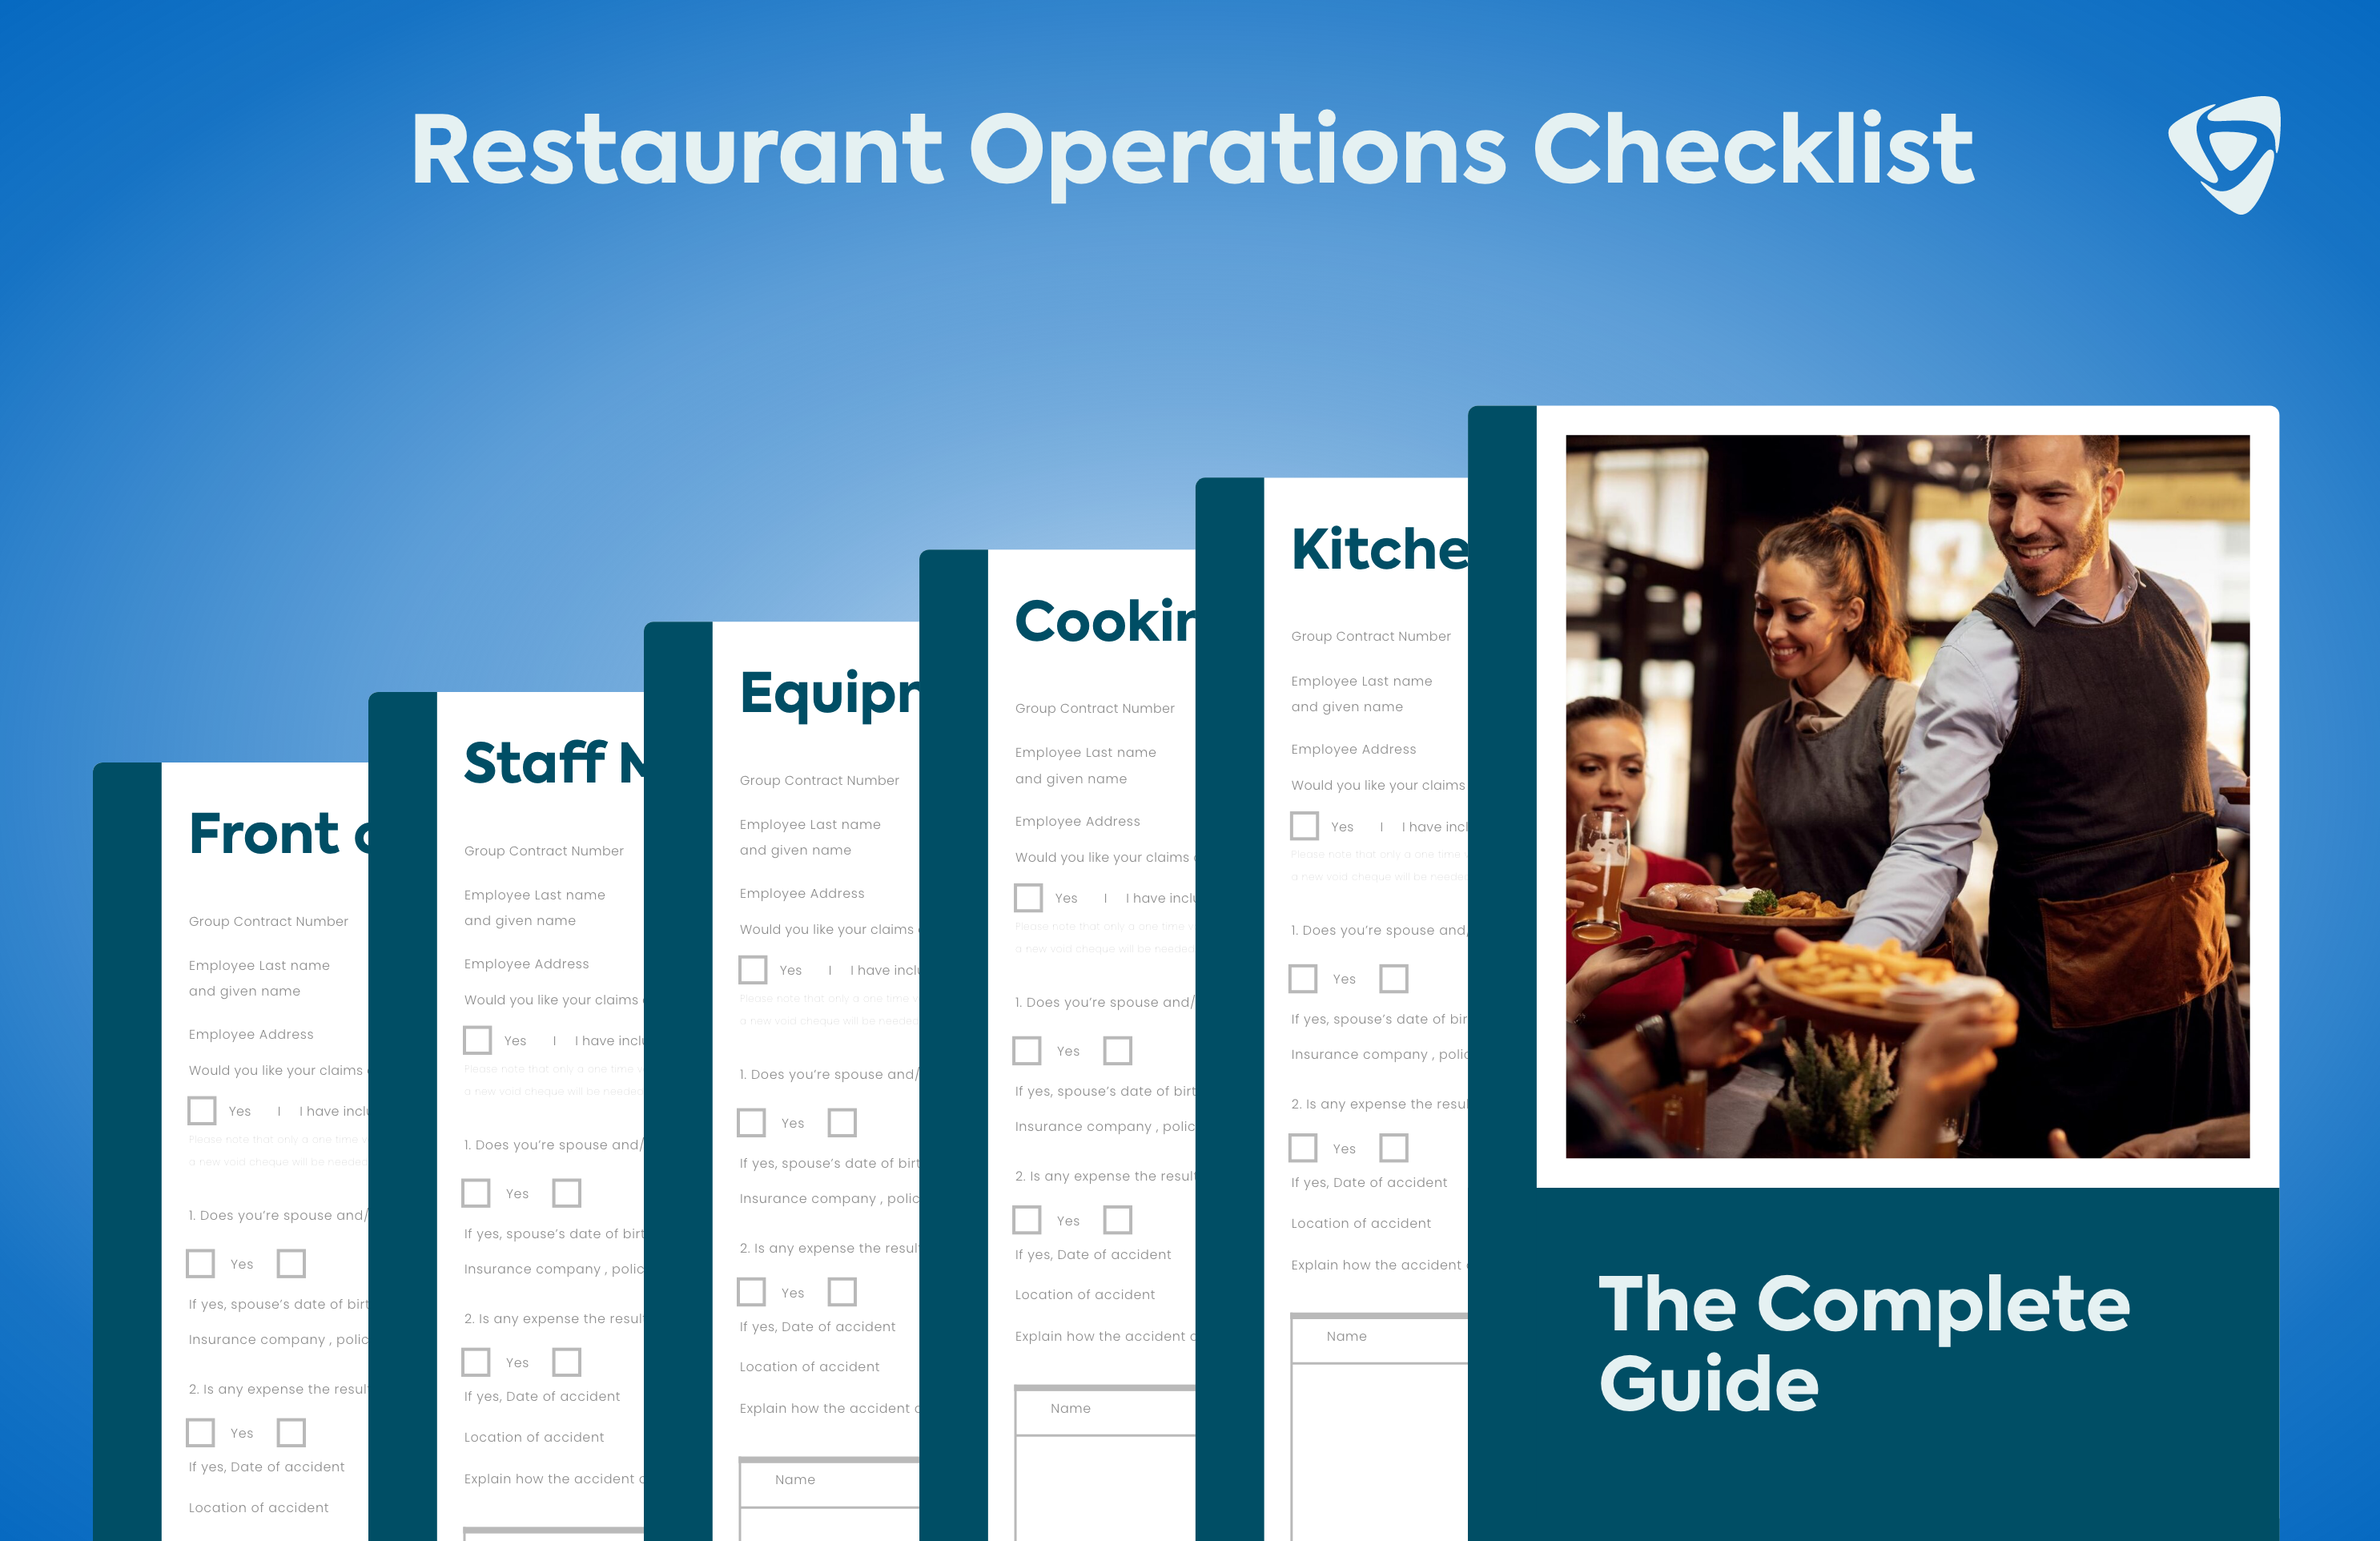 Restaurant Operations Checklist: The Complete Guide